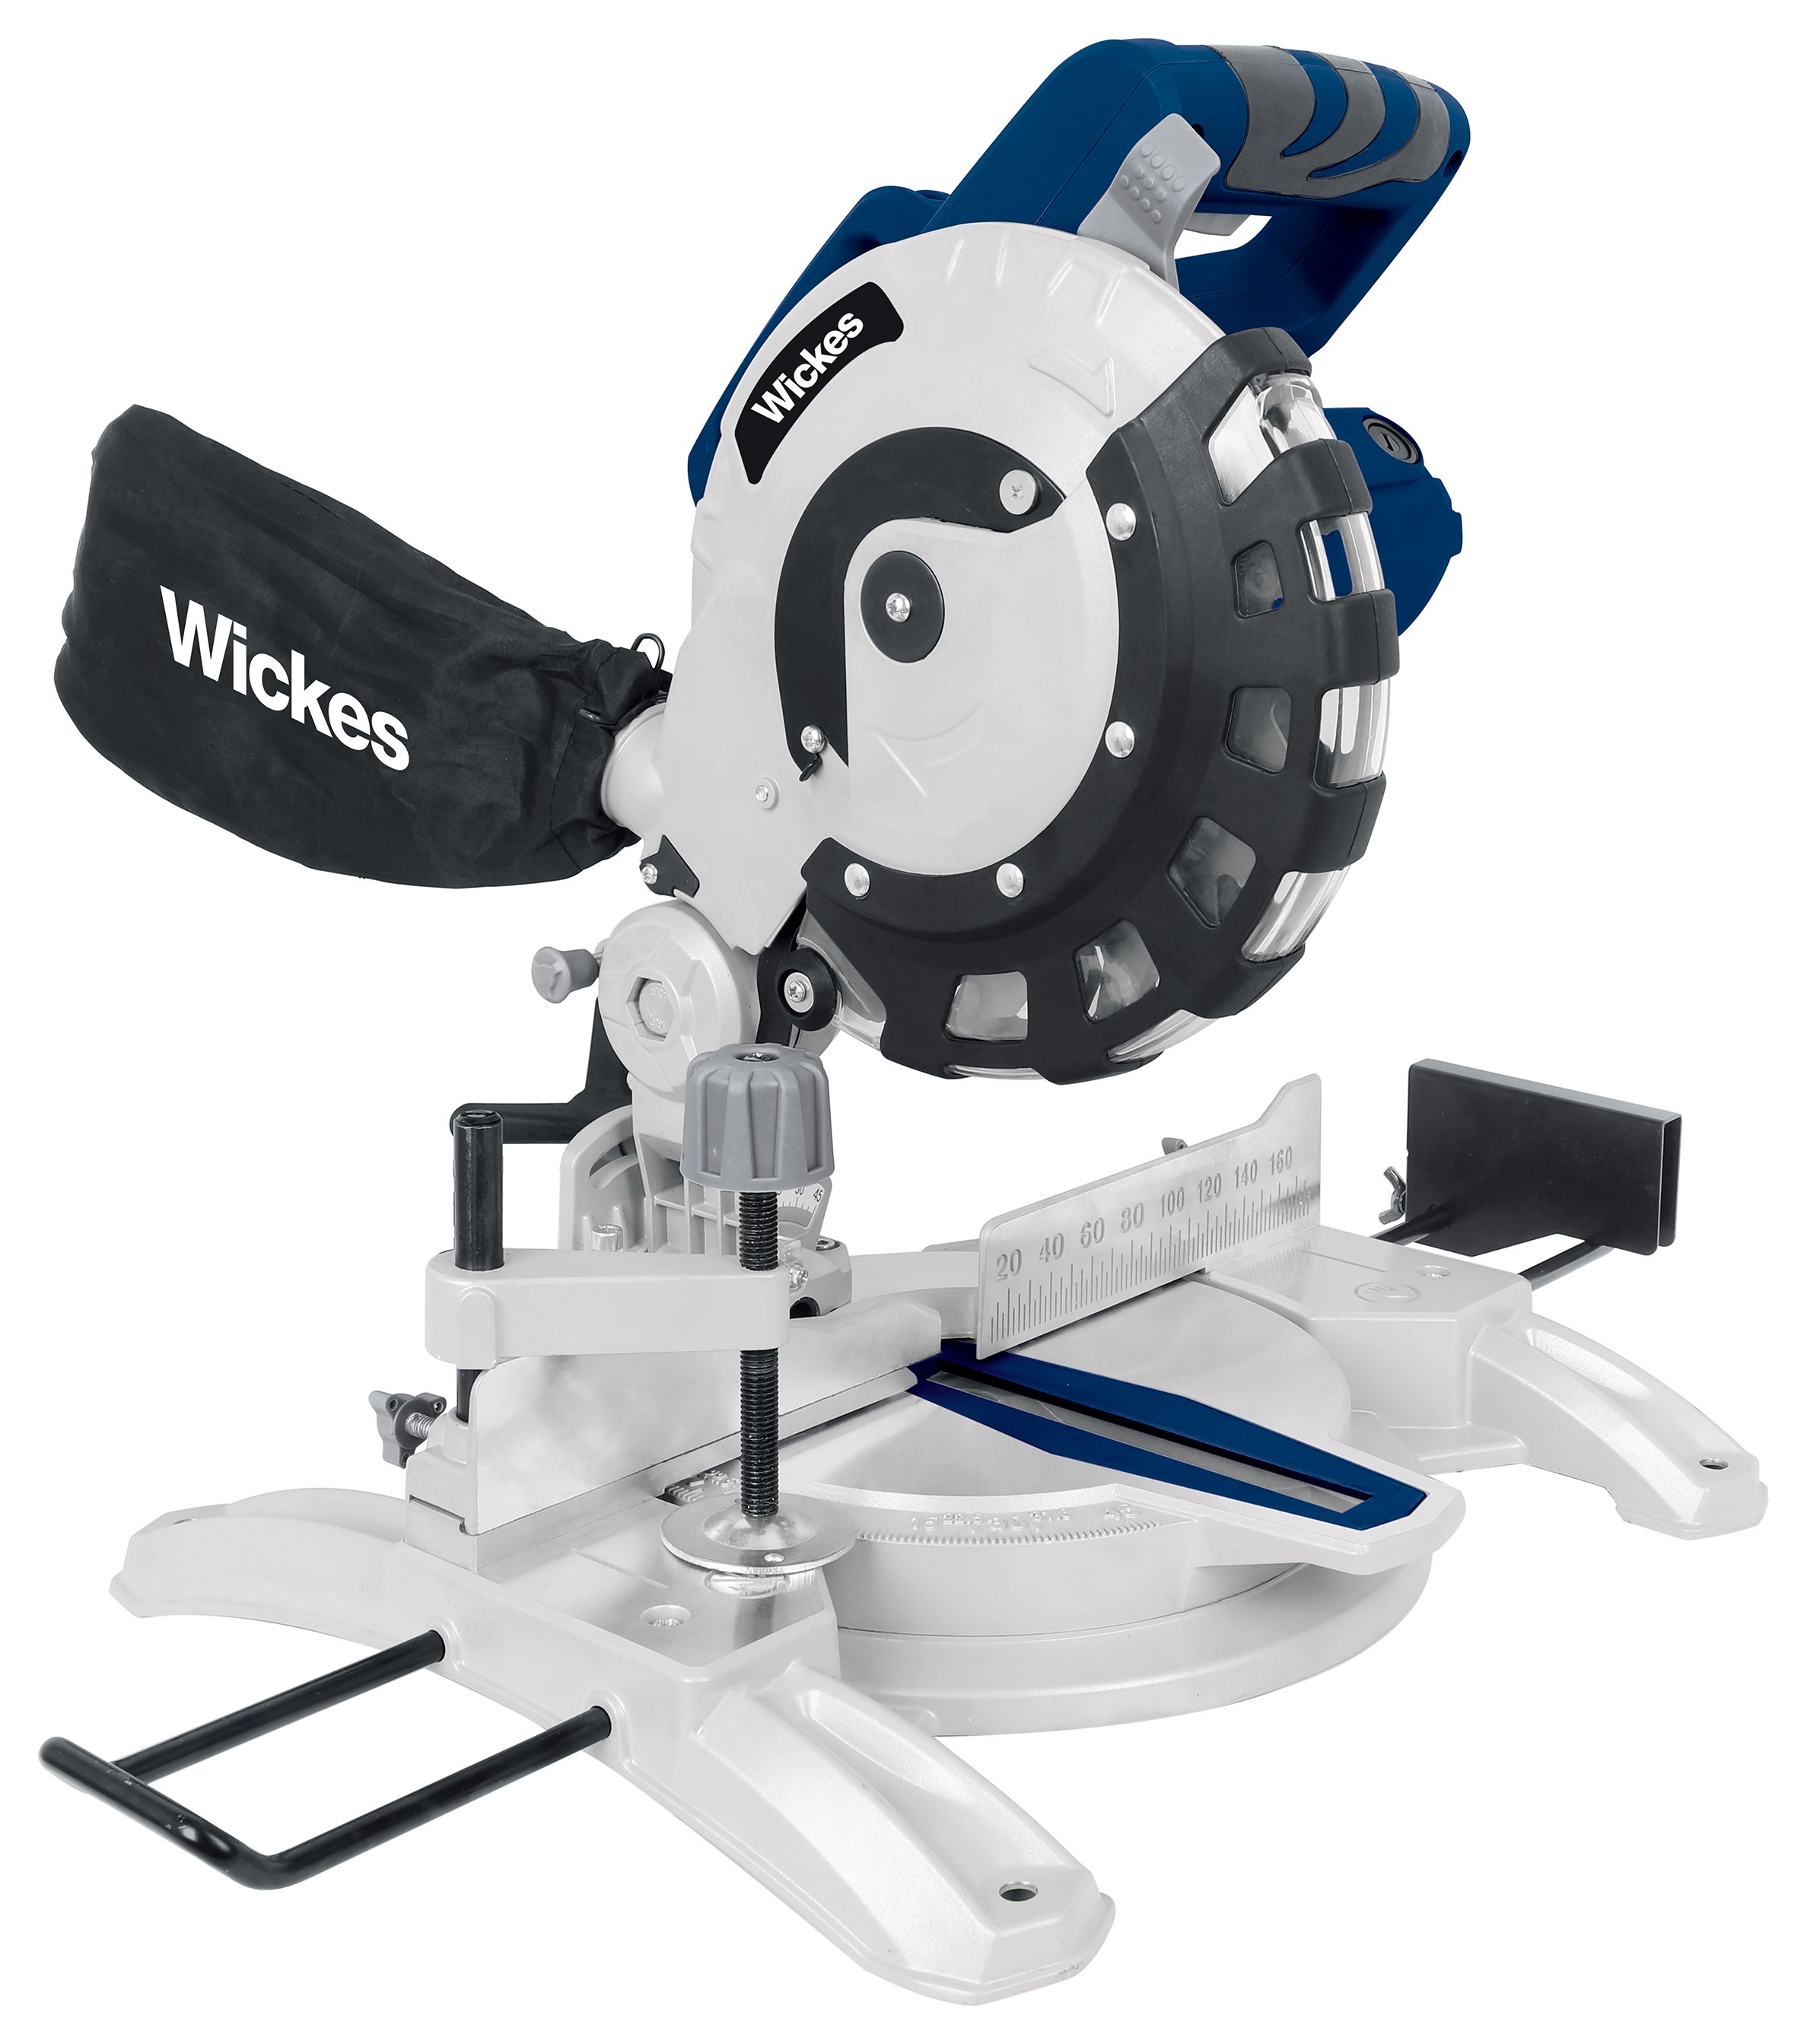 Image of Wickes 210mm Corded Compound Mitre Saw - 1800W